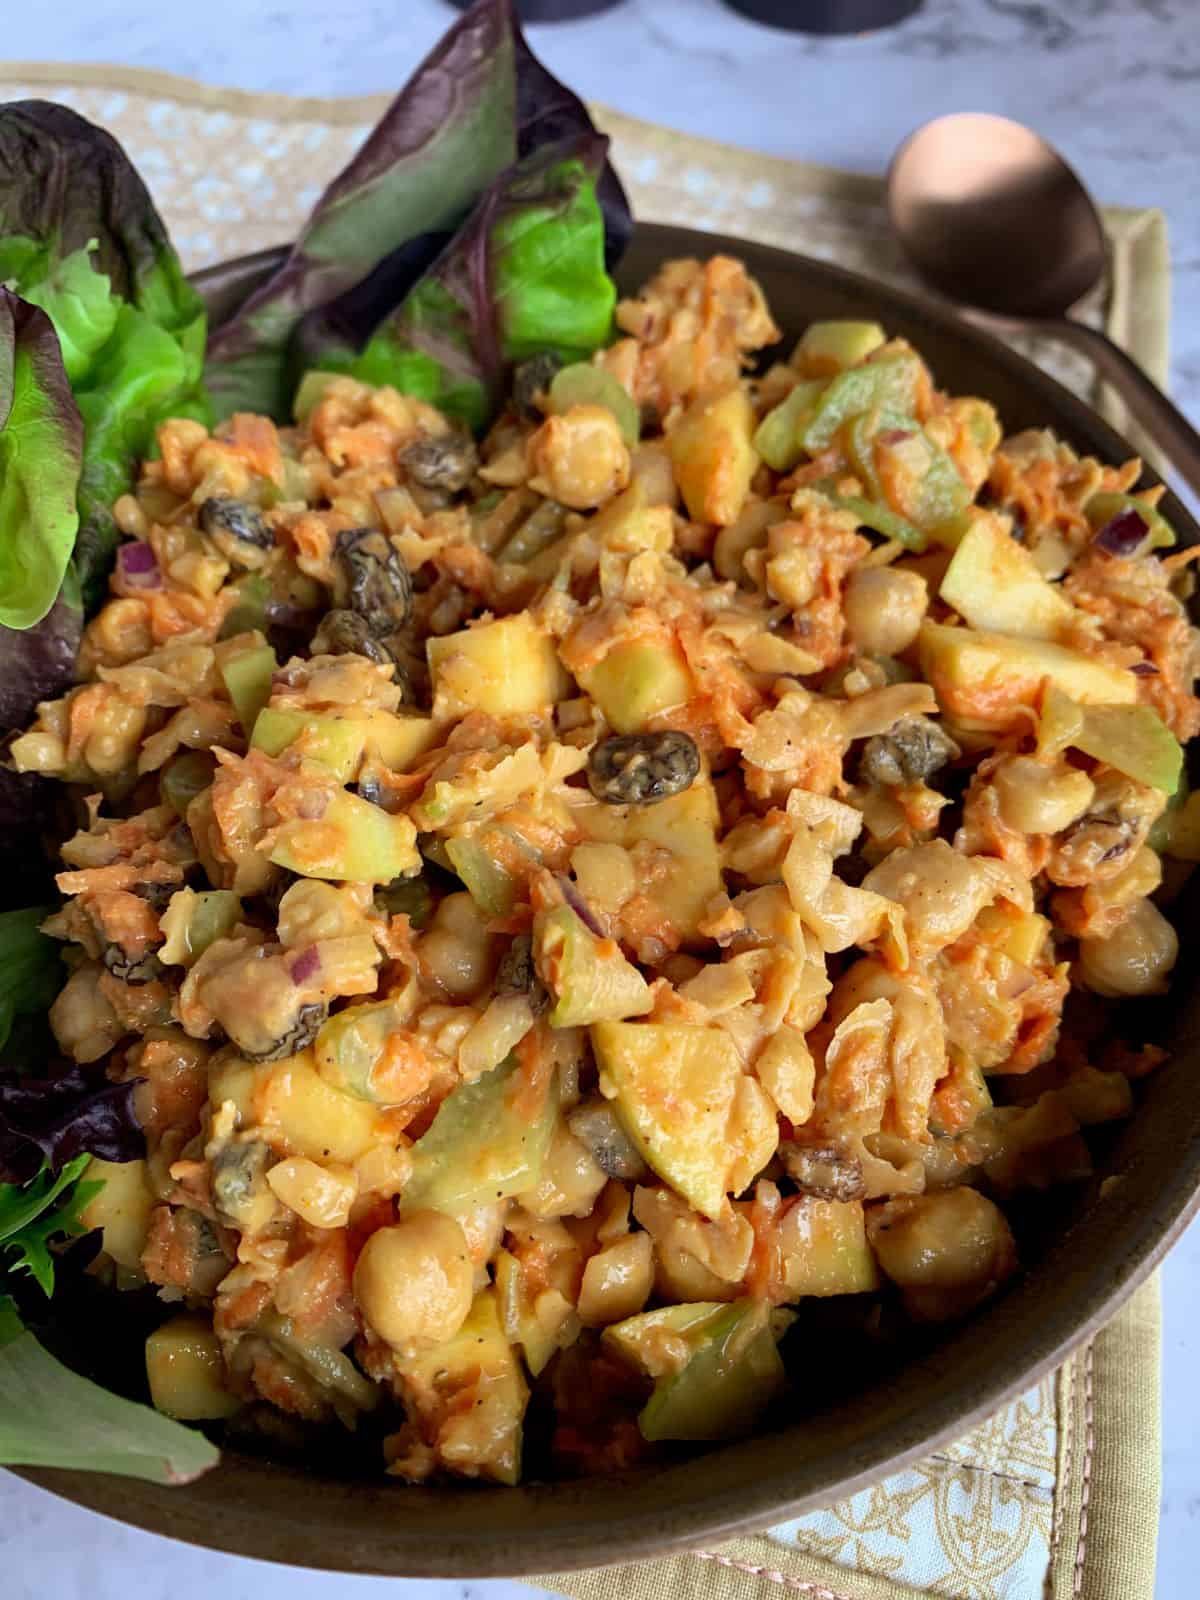 Prepared curry chickpea salad with greens in a brown bowl.